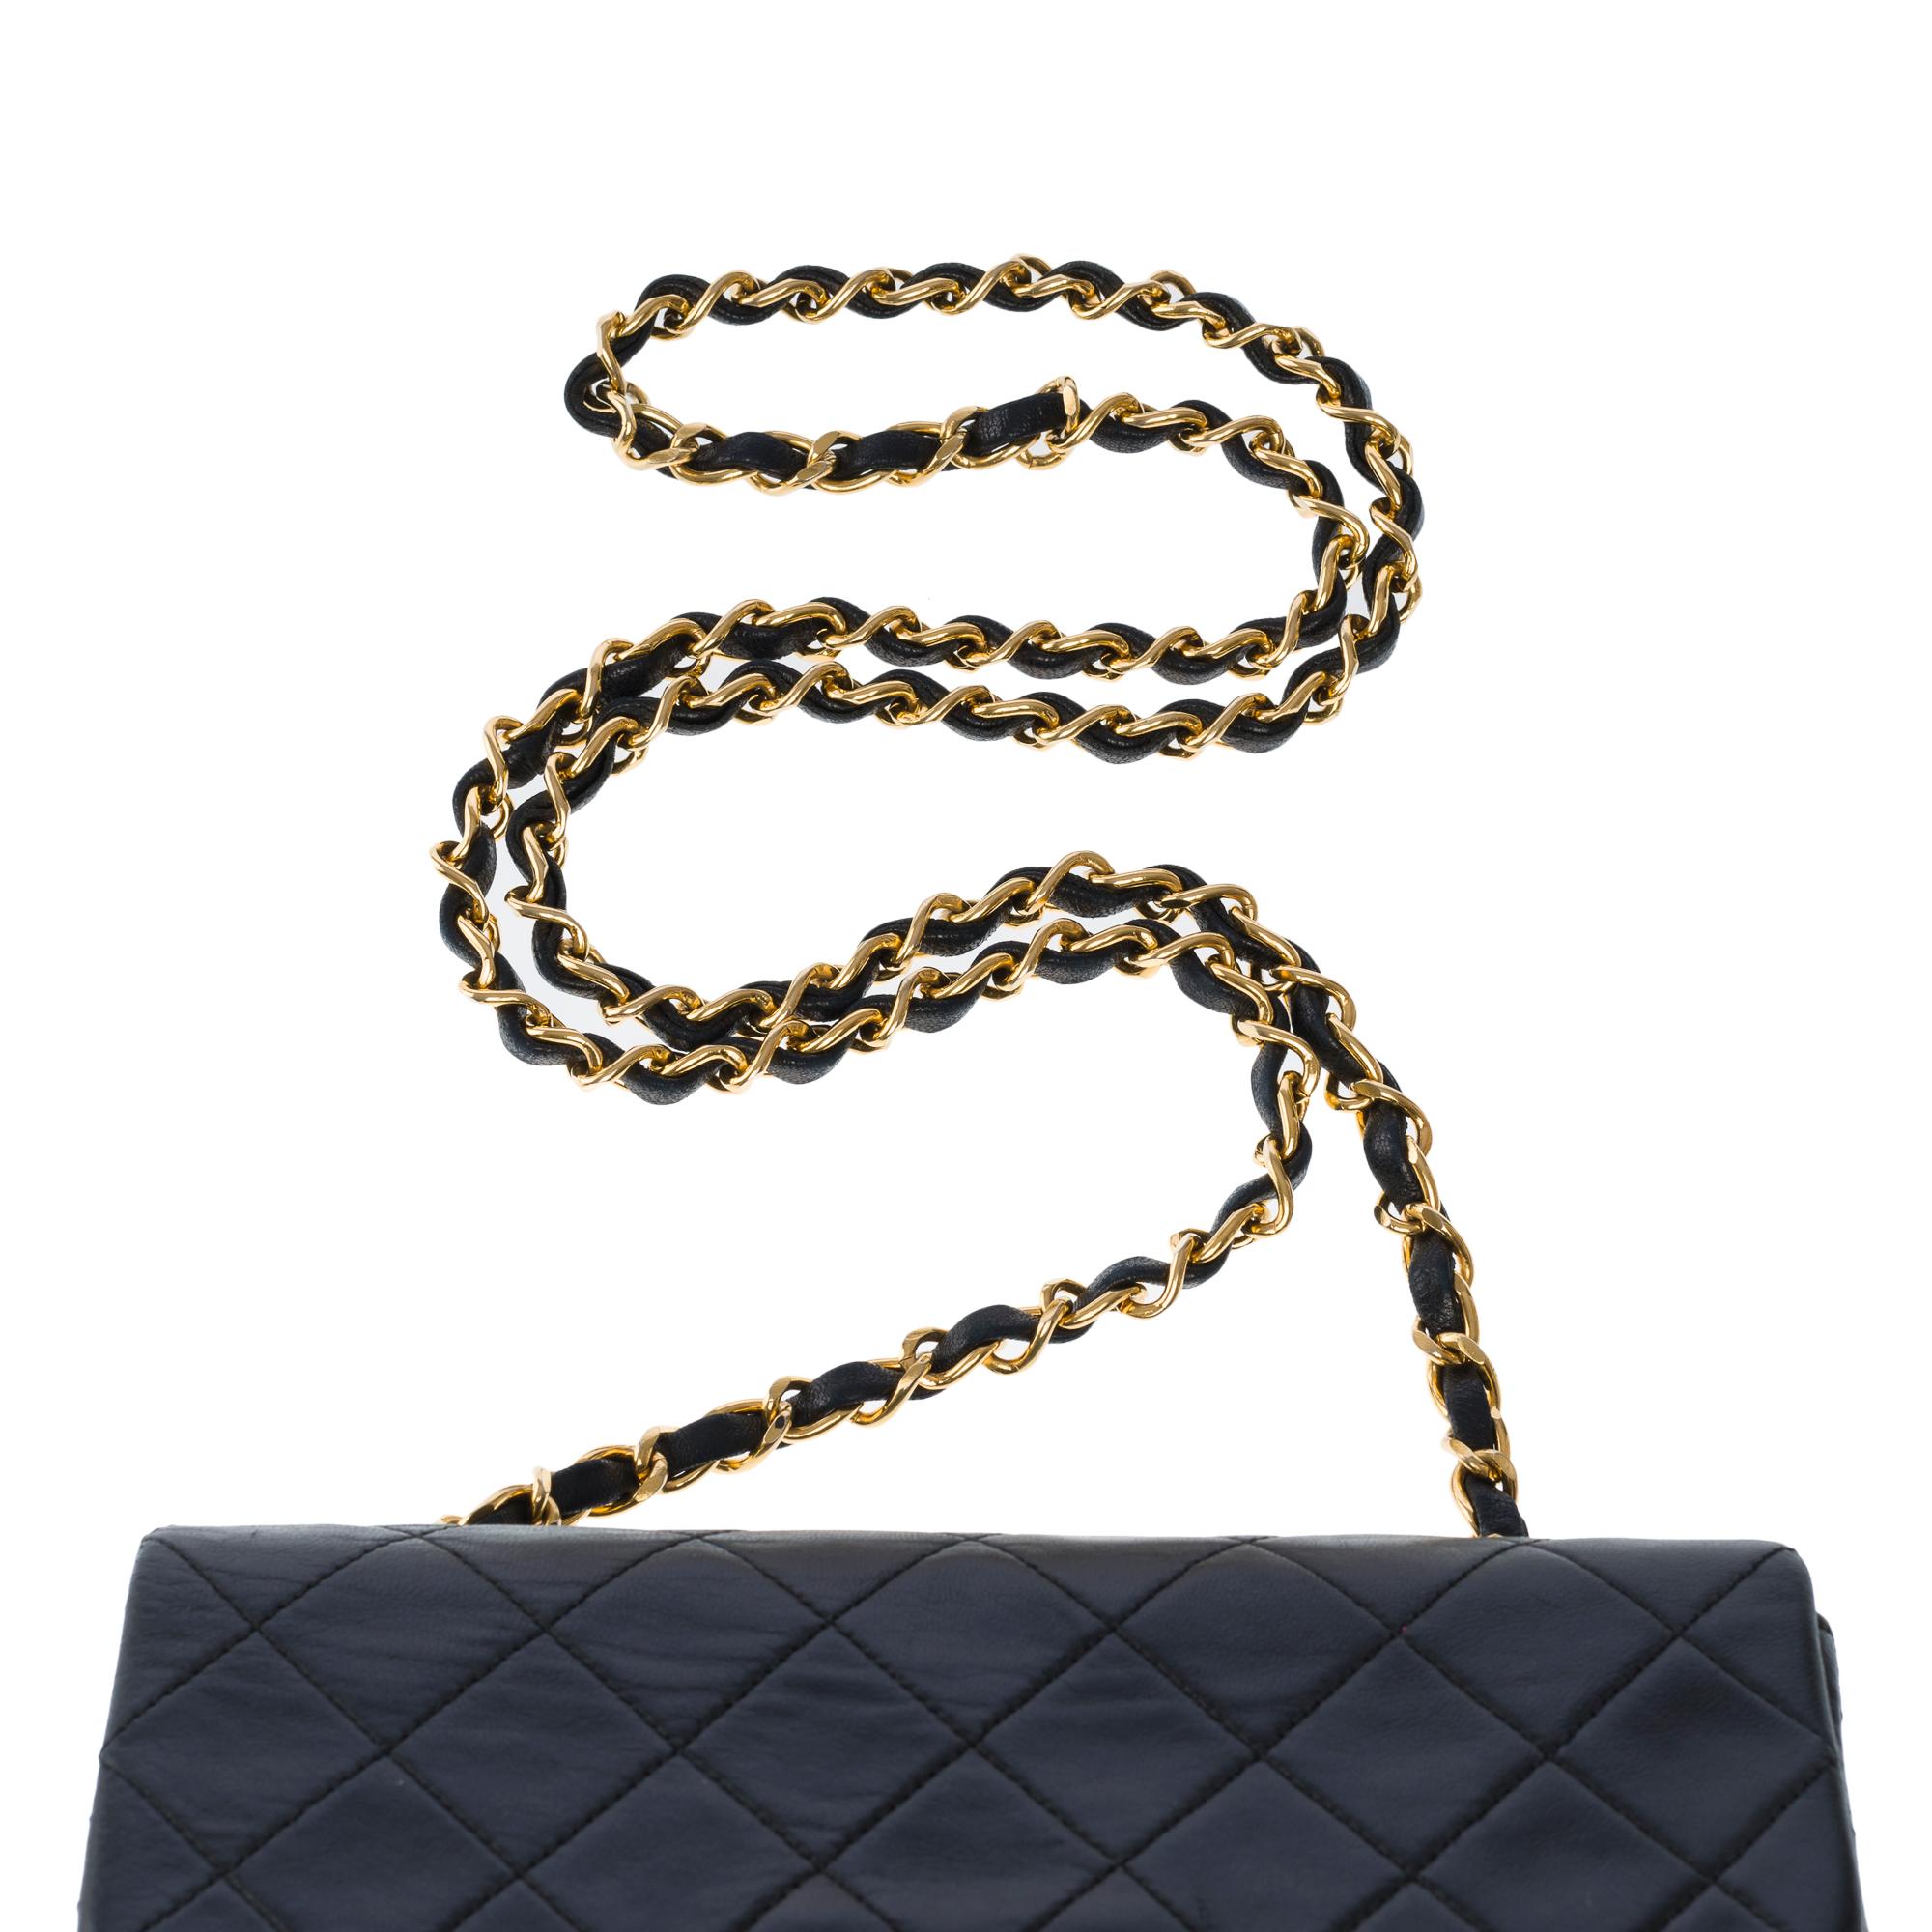 Gorgeous Chanel Timeless Mini shoulder flap bag in black quilted lambskin, GHW 6